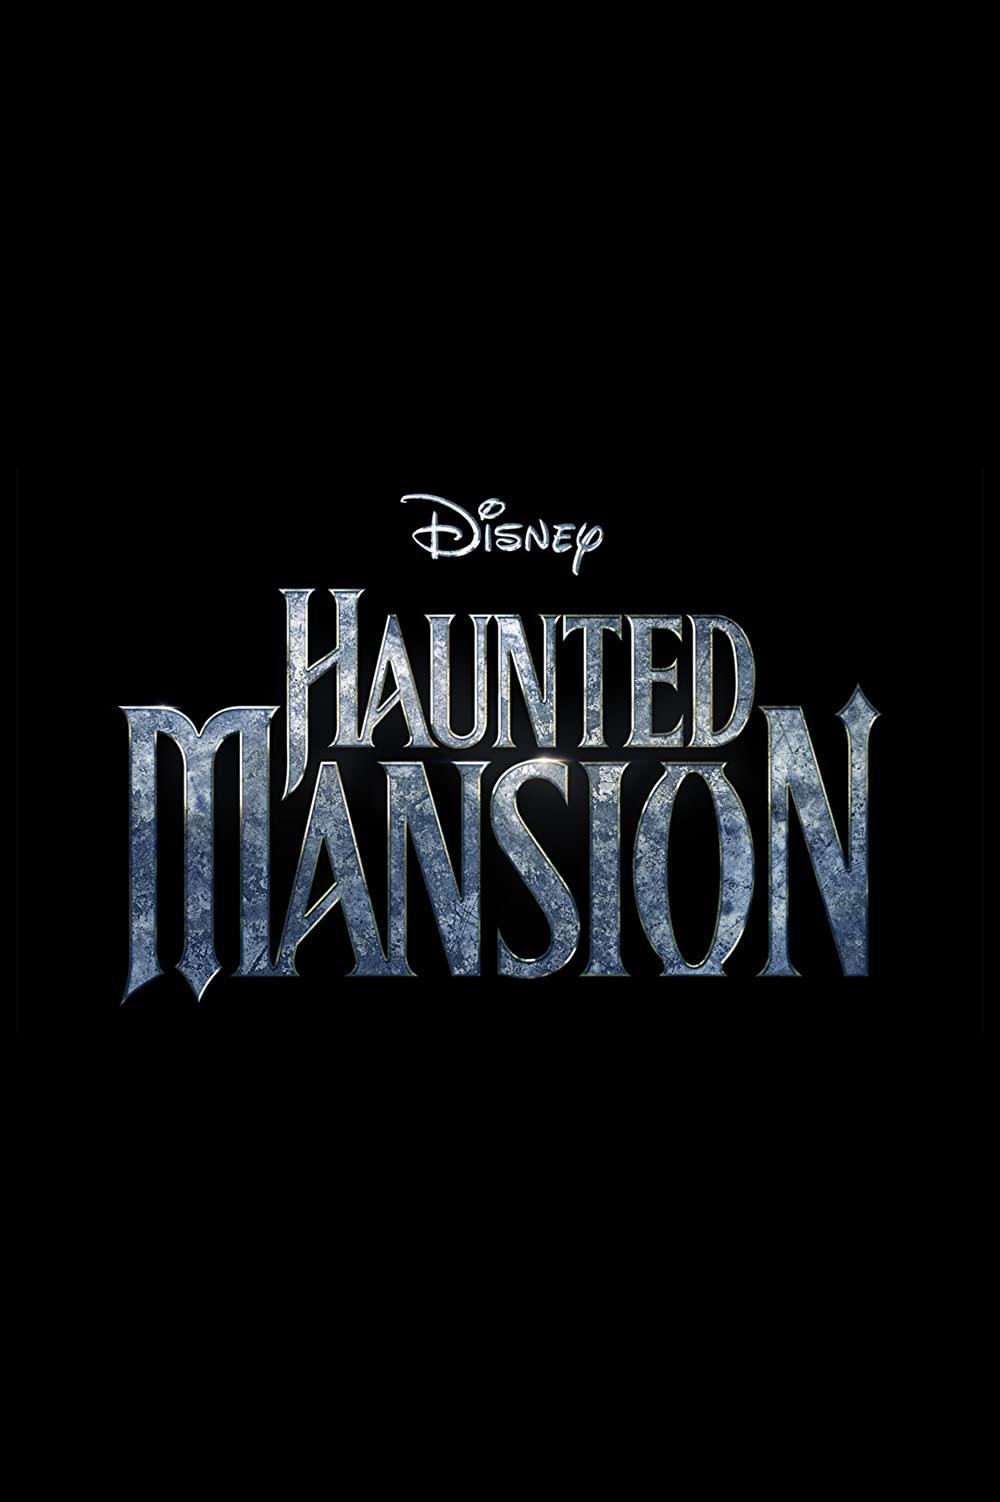 Haunted Mansion (2023) DVD Release Date